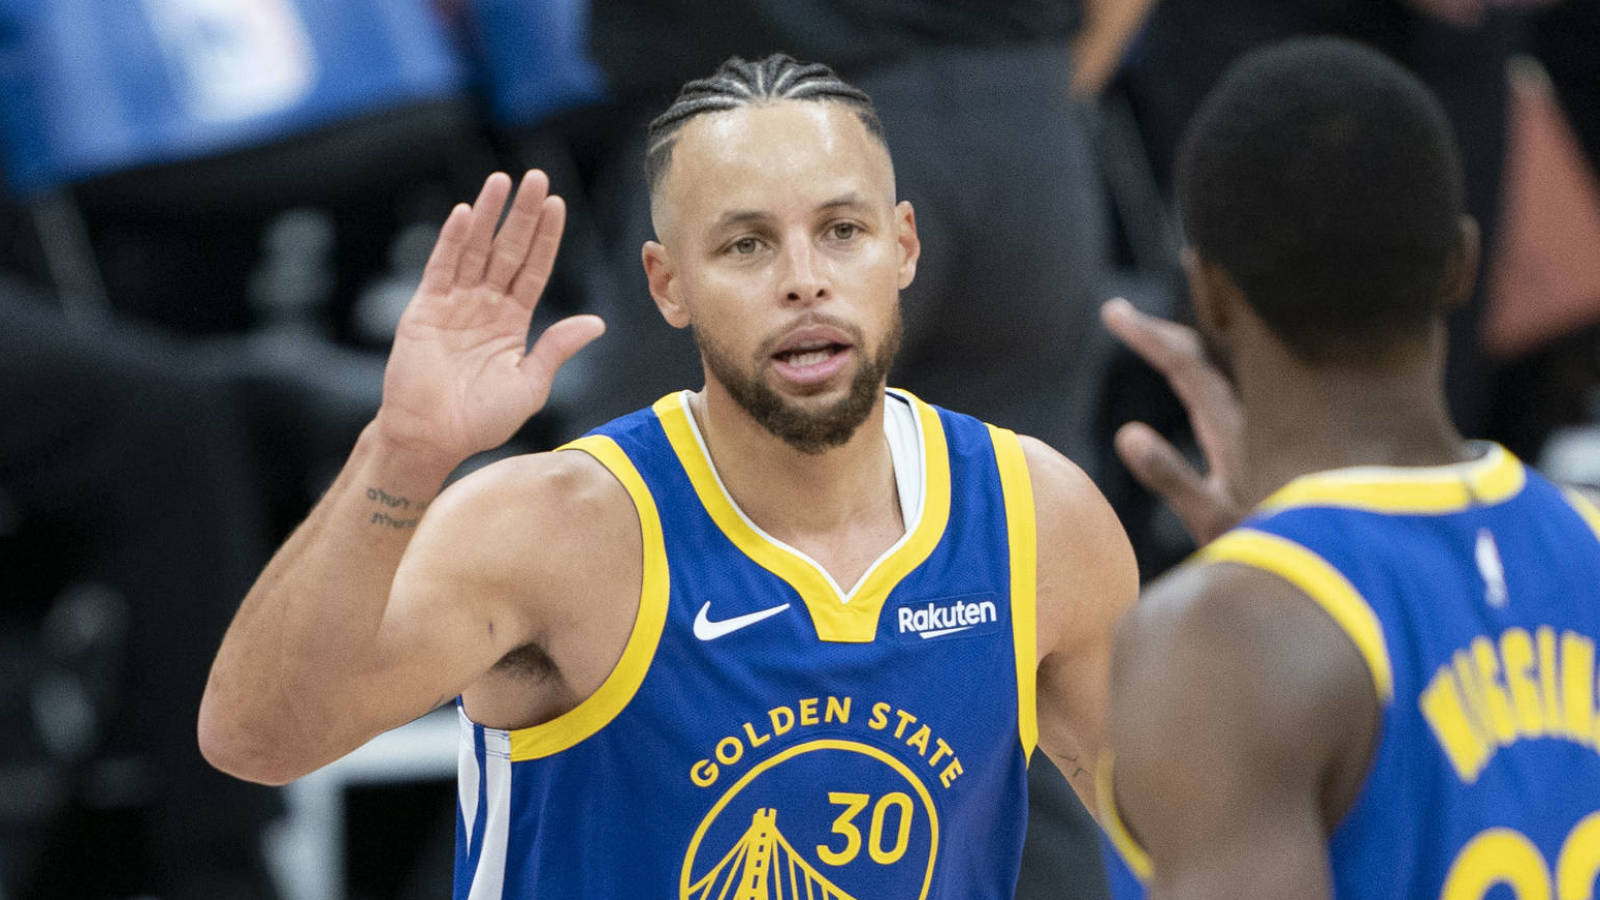 Steph Curry shows off new braids hairstyle for NBA season | Yardbarker